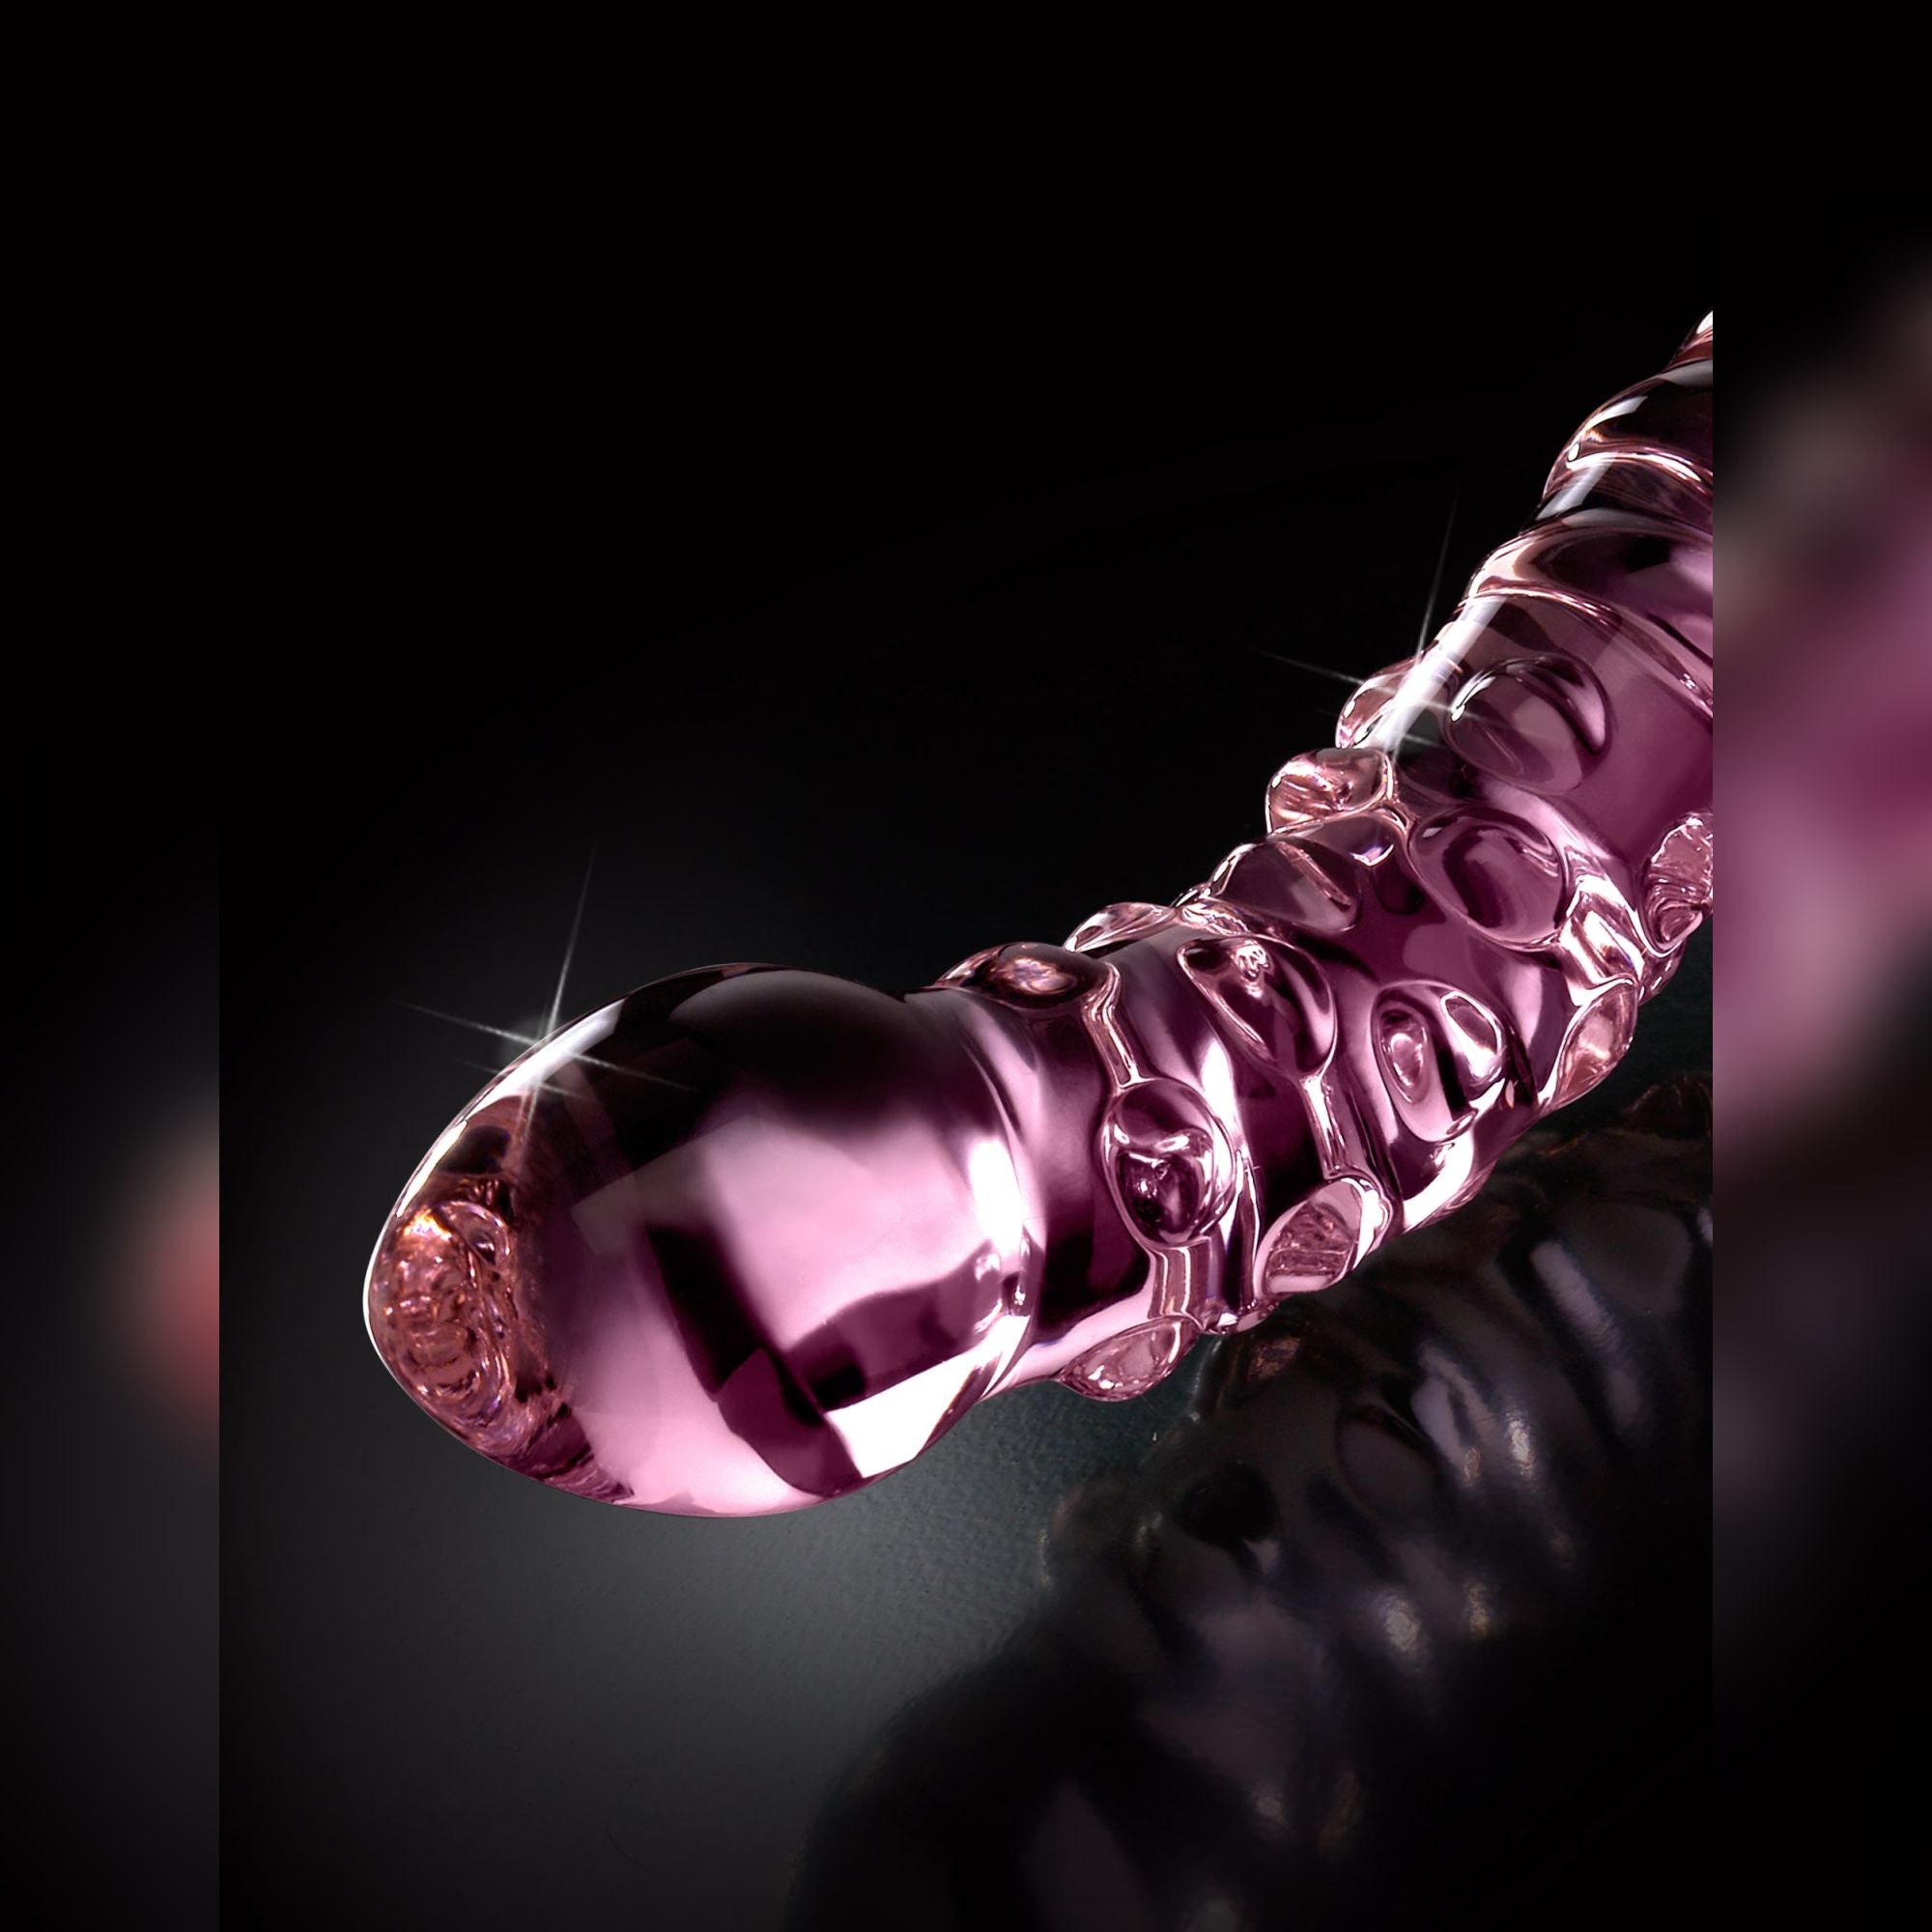 Icicles No 55 Textured Pink Double Ended Glass Dildo